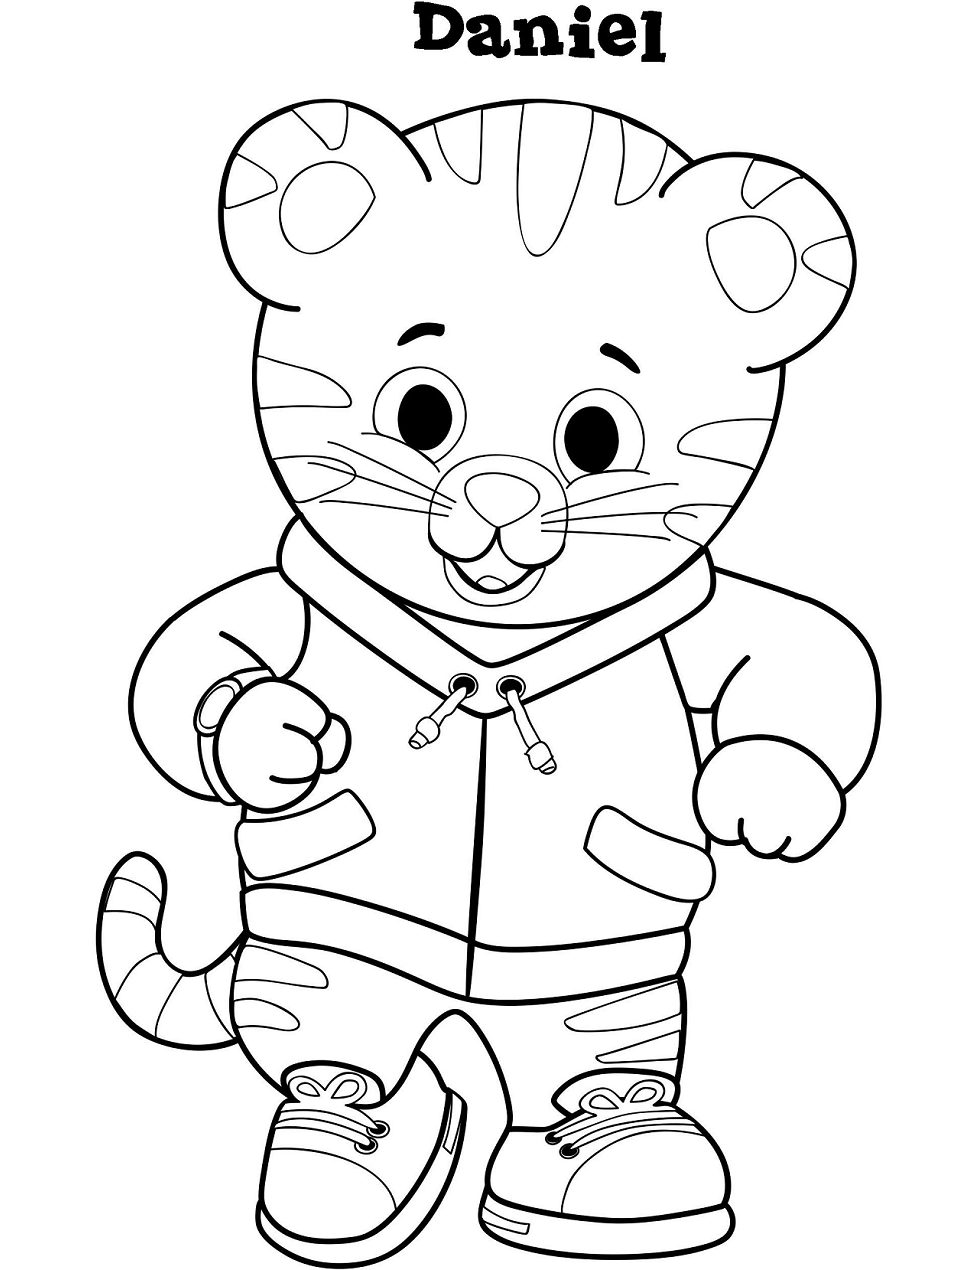 Happy Daniel Tiger Coloring Page Free Printable Coloring Pages for Kids